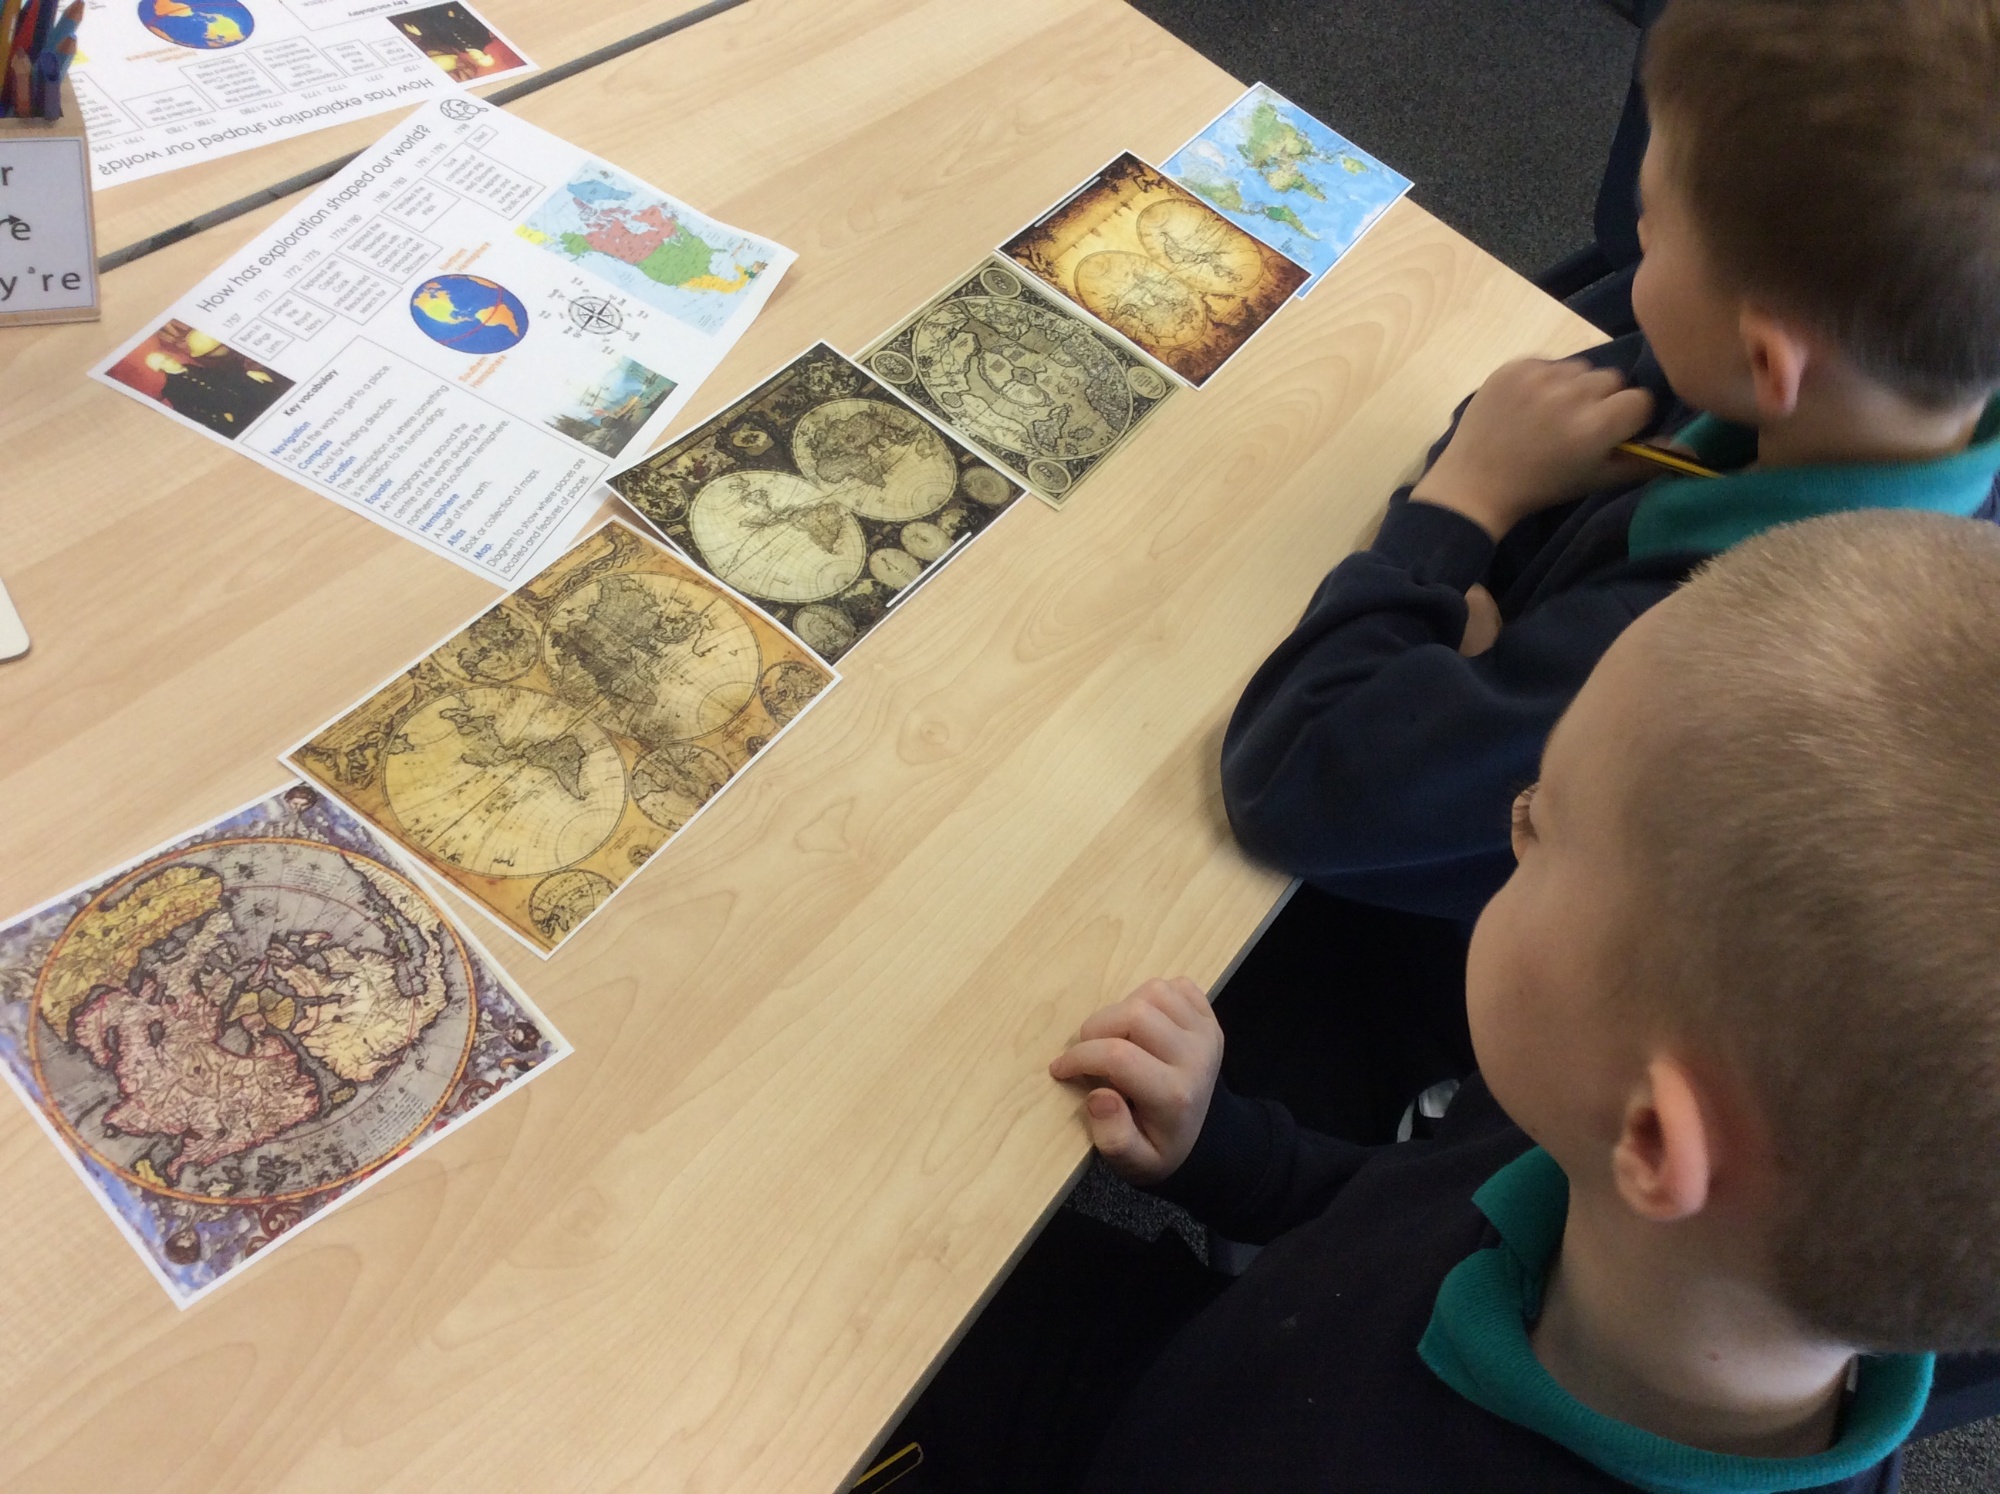 Using our chronological understanding to order maps of the world